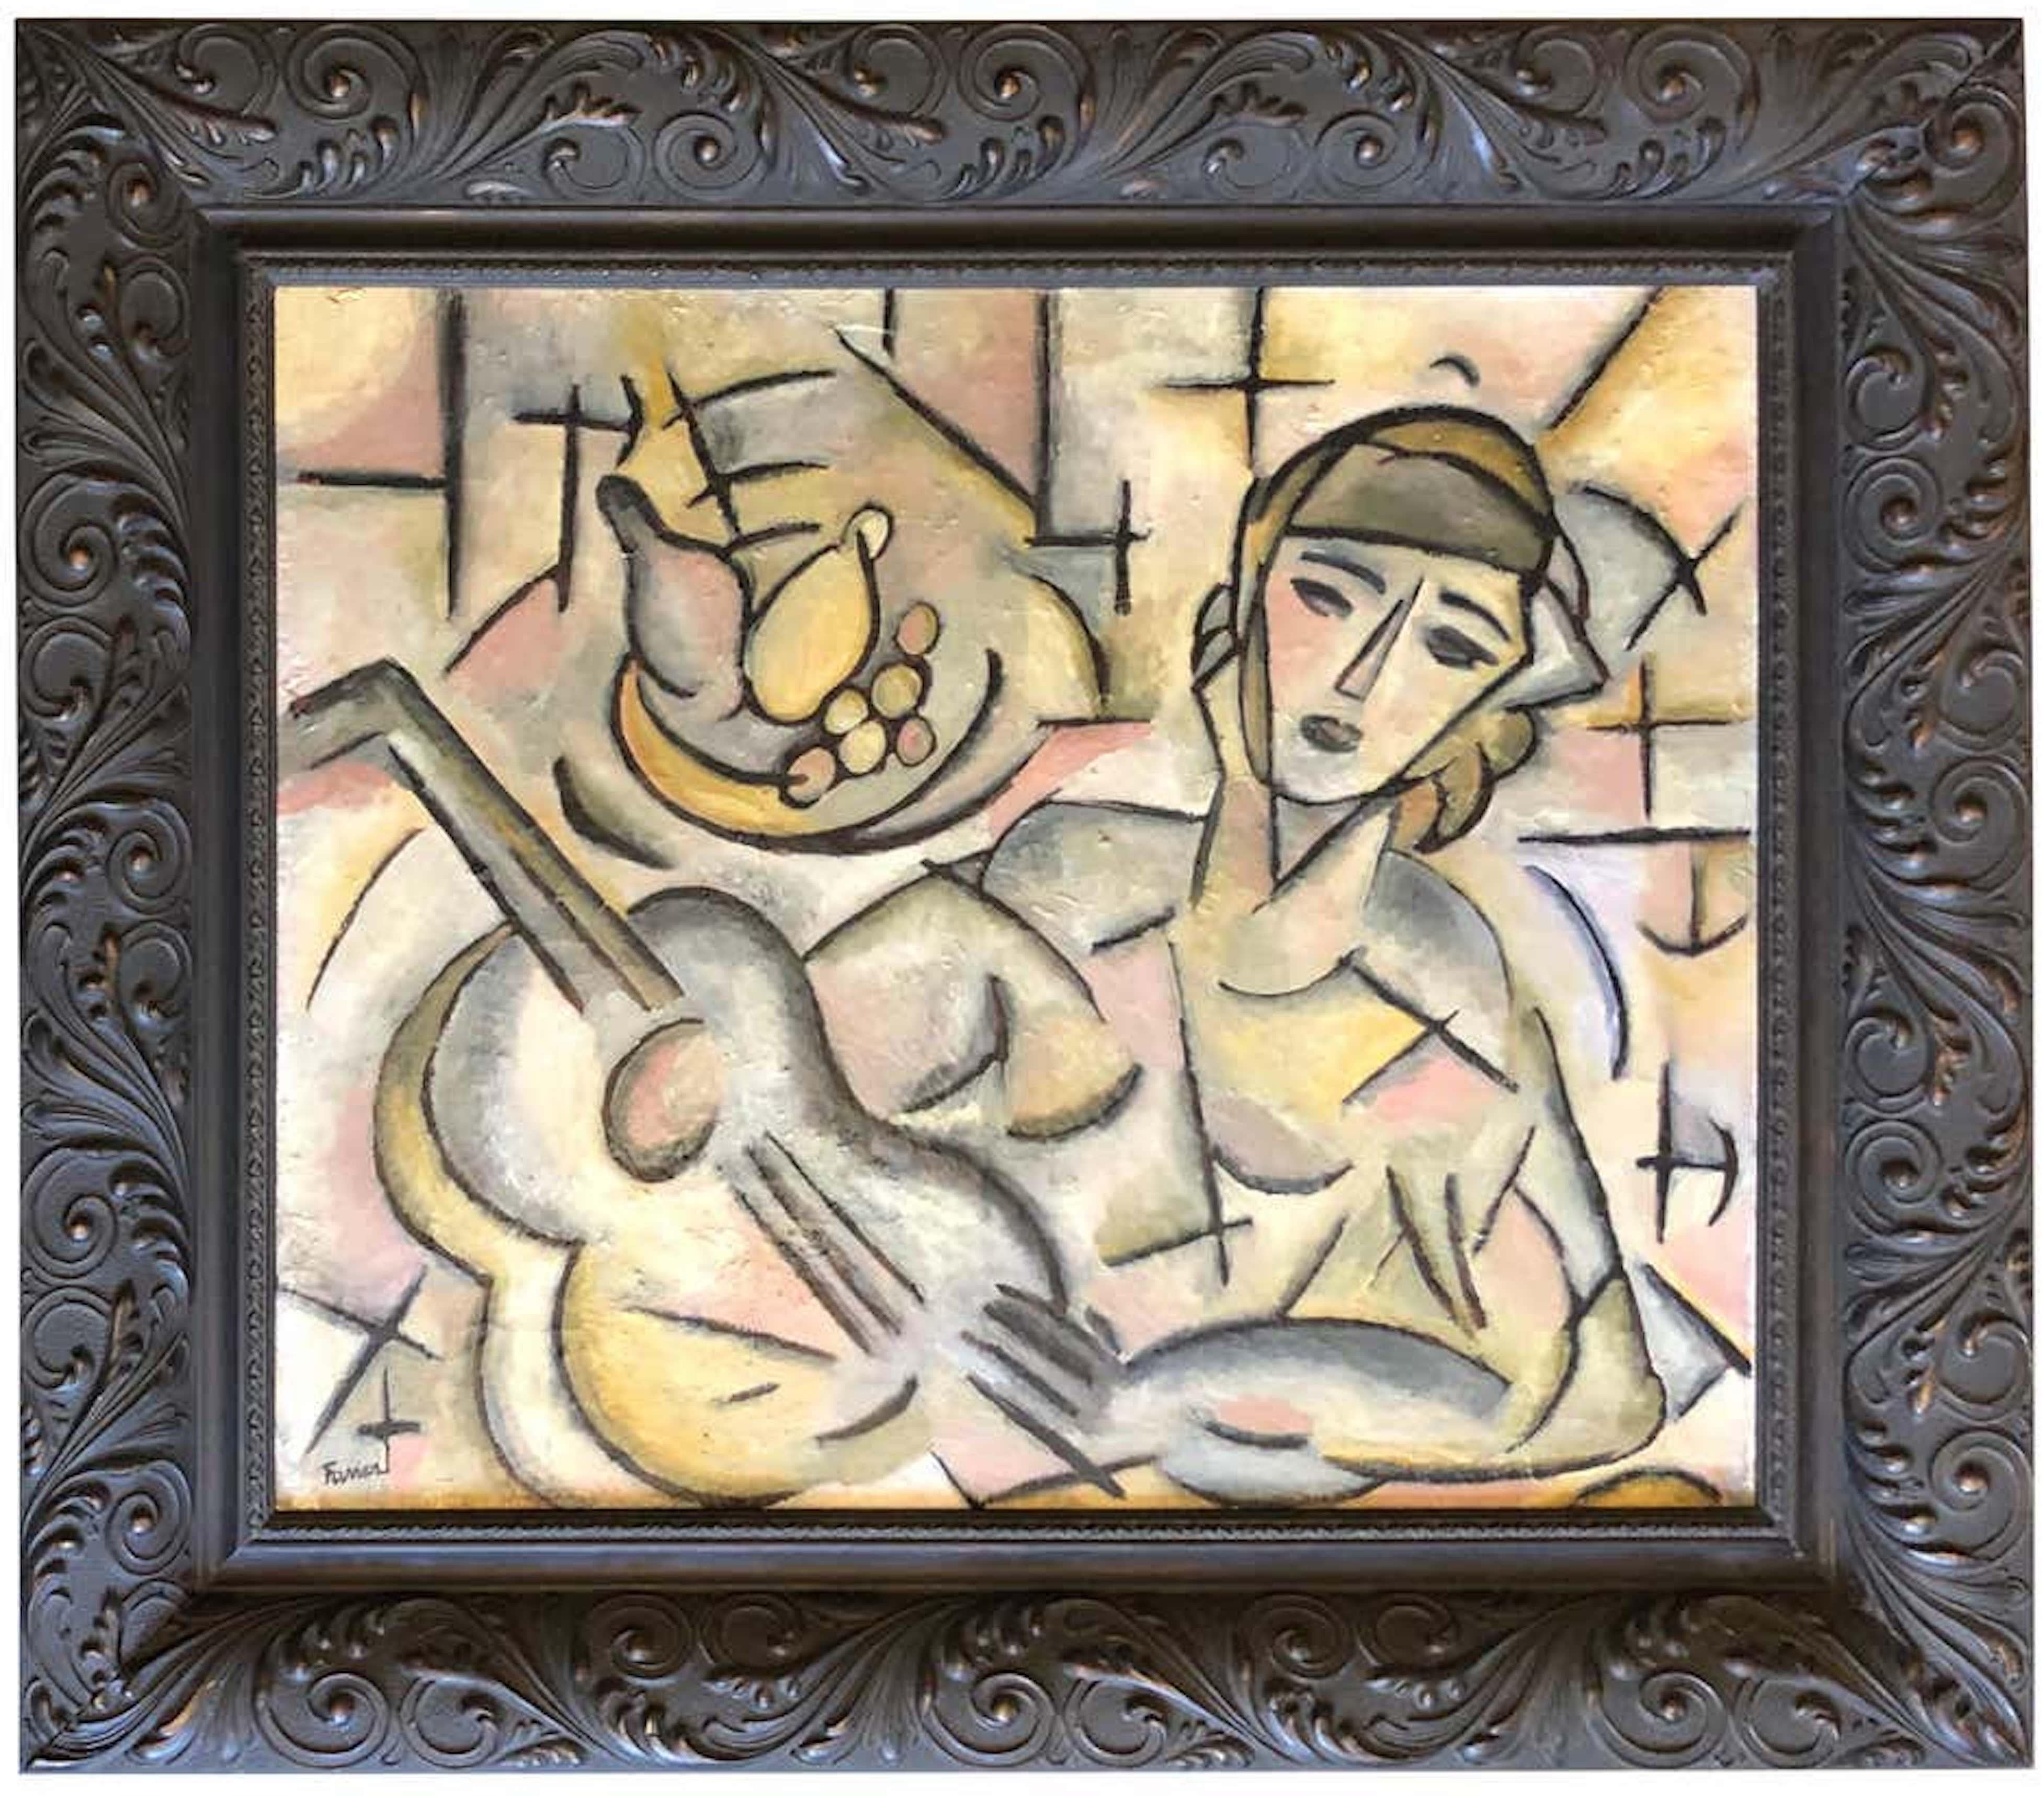 Pierre Favier Figurative Painting - Girl with Guitar 